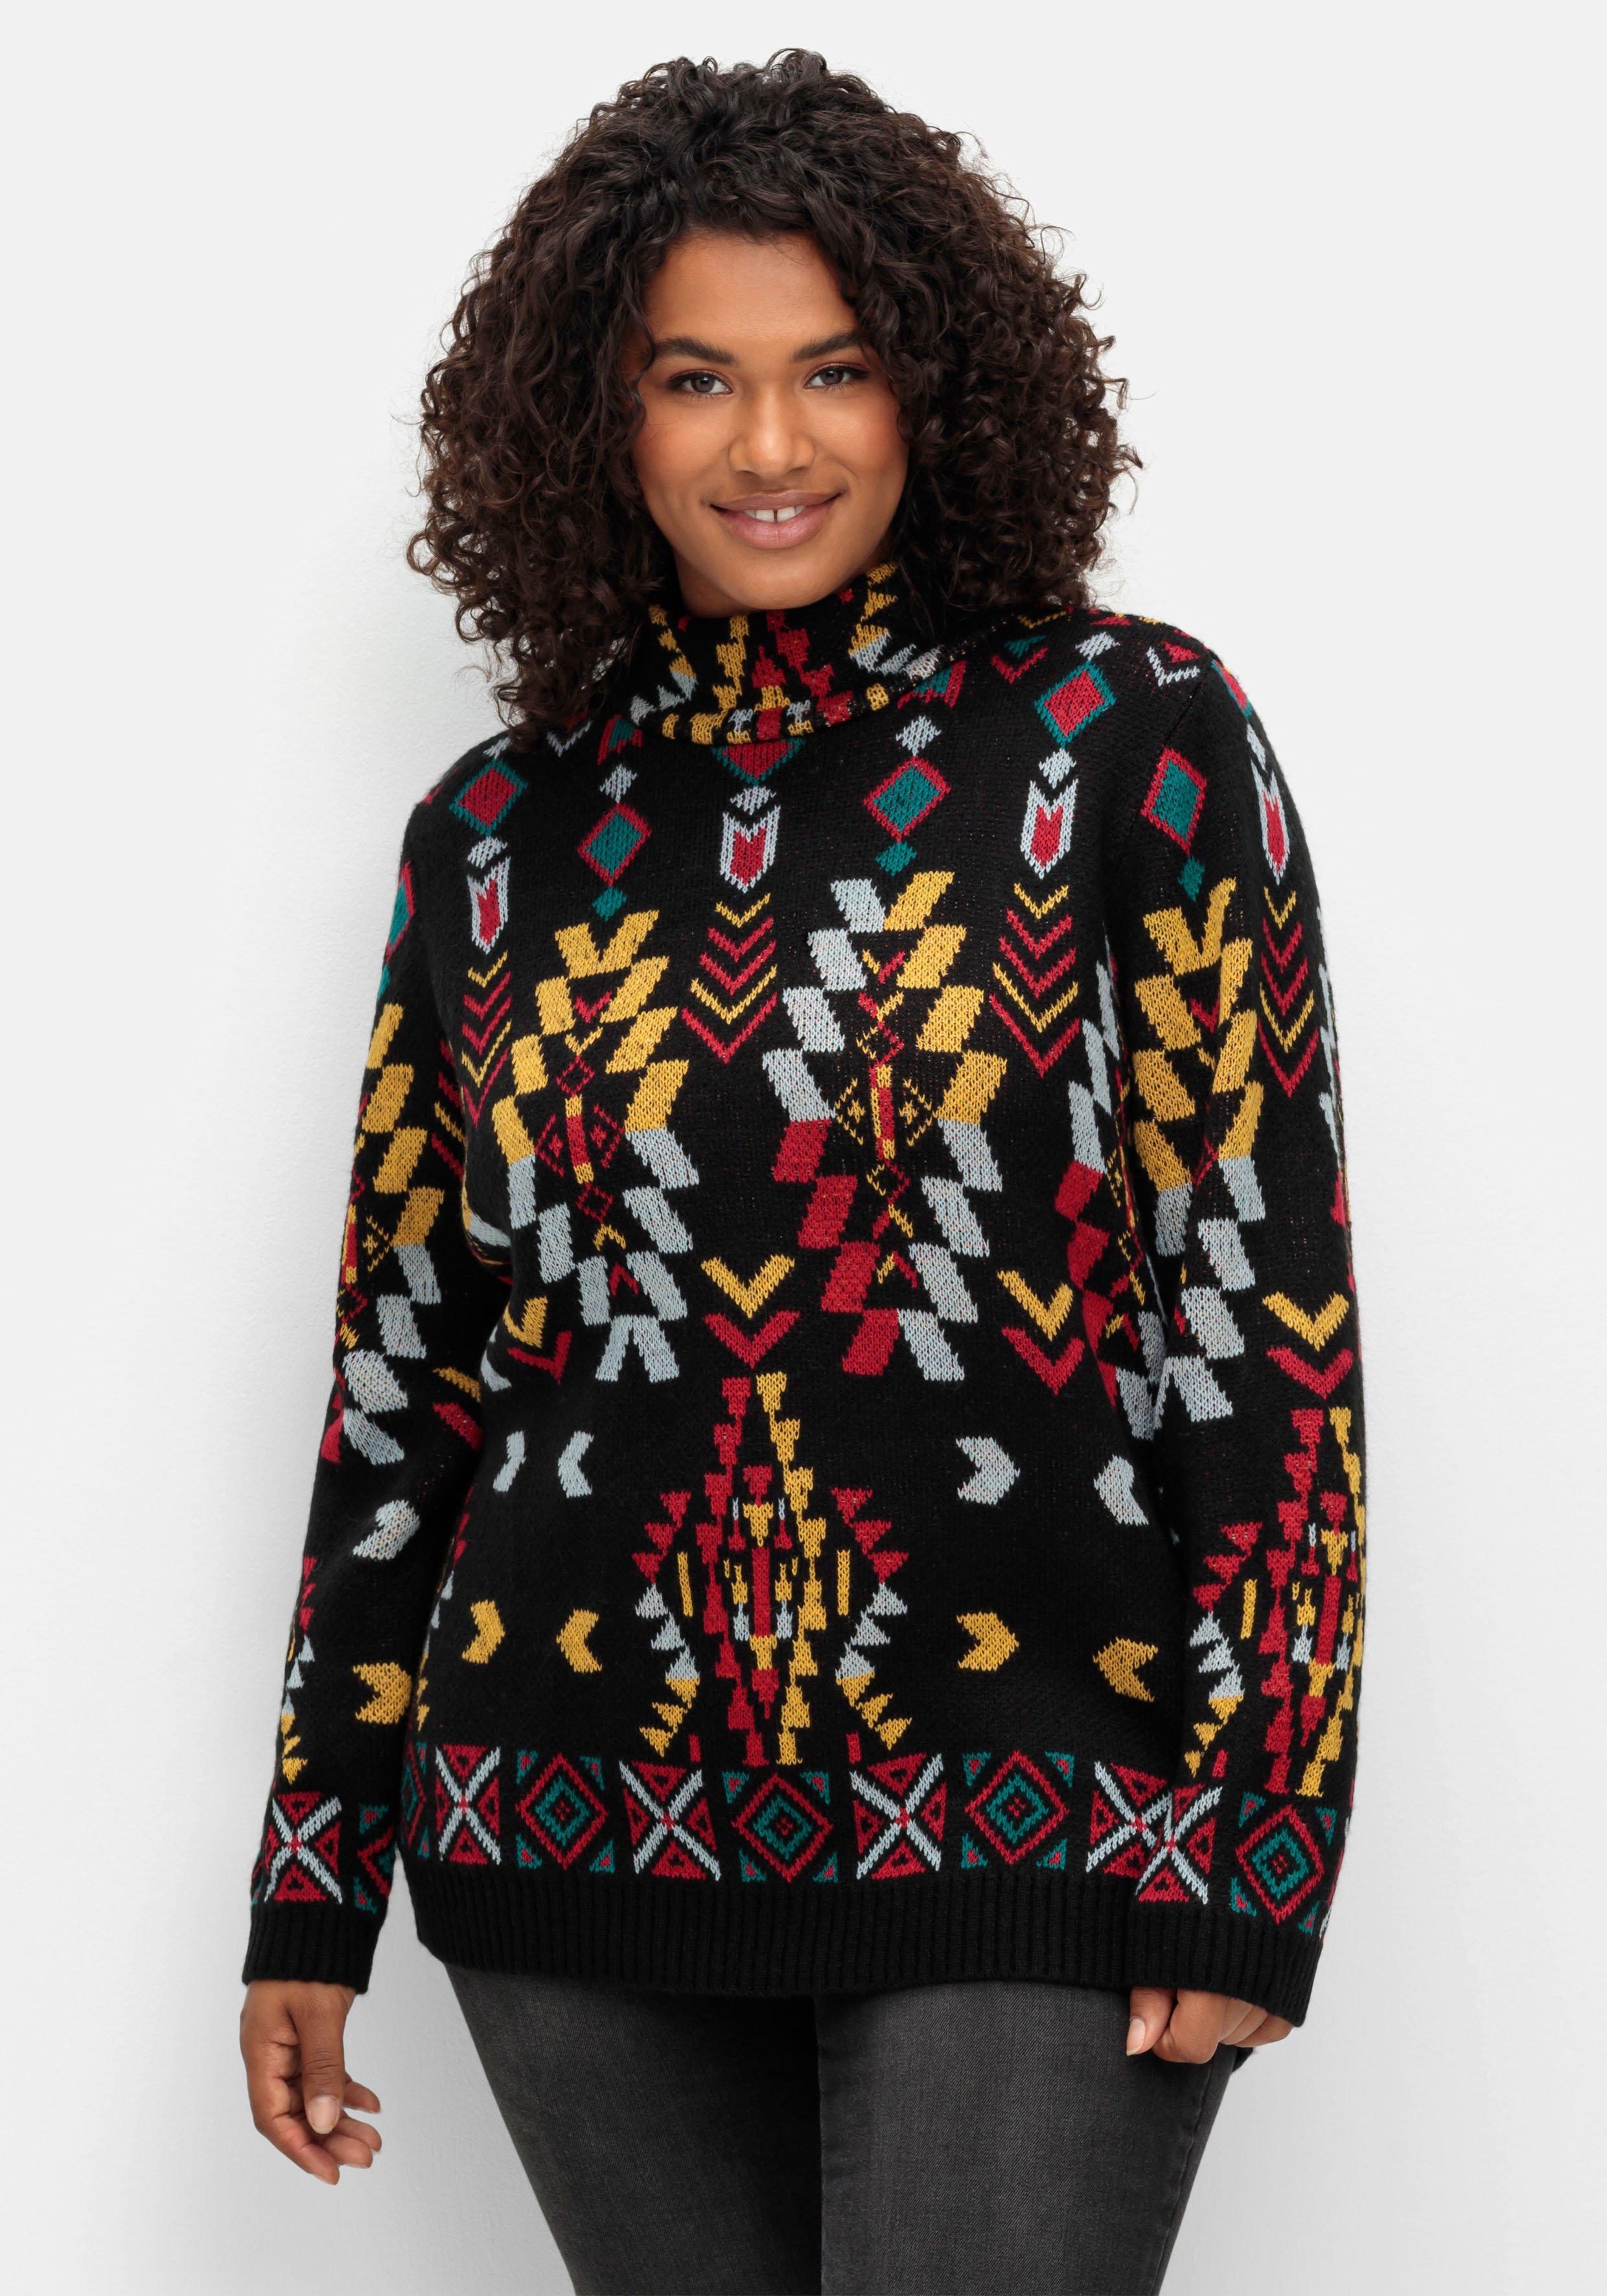 Browns | Mode Plus Size Cardigans Pullover ♥ Joe & sheego